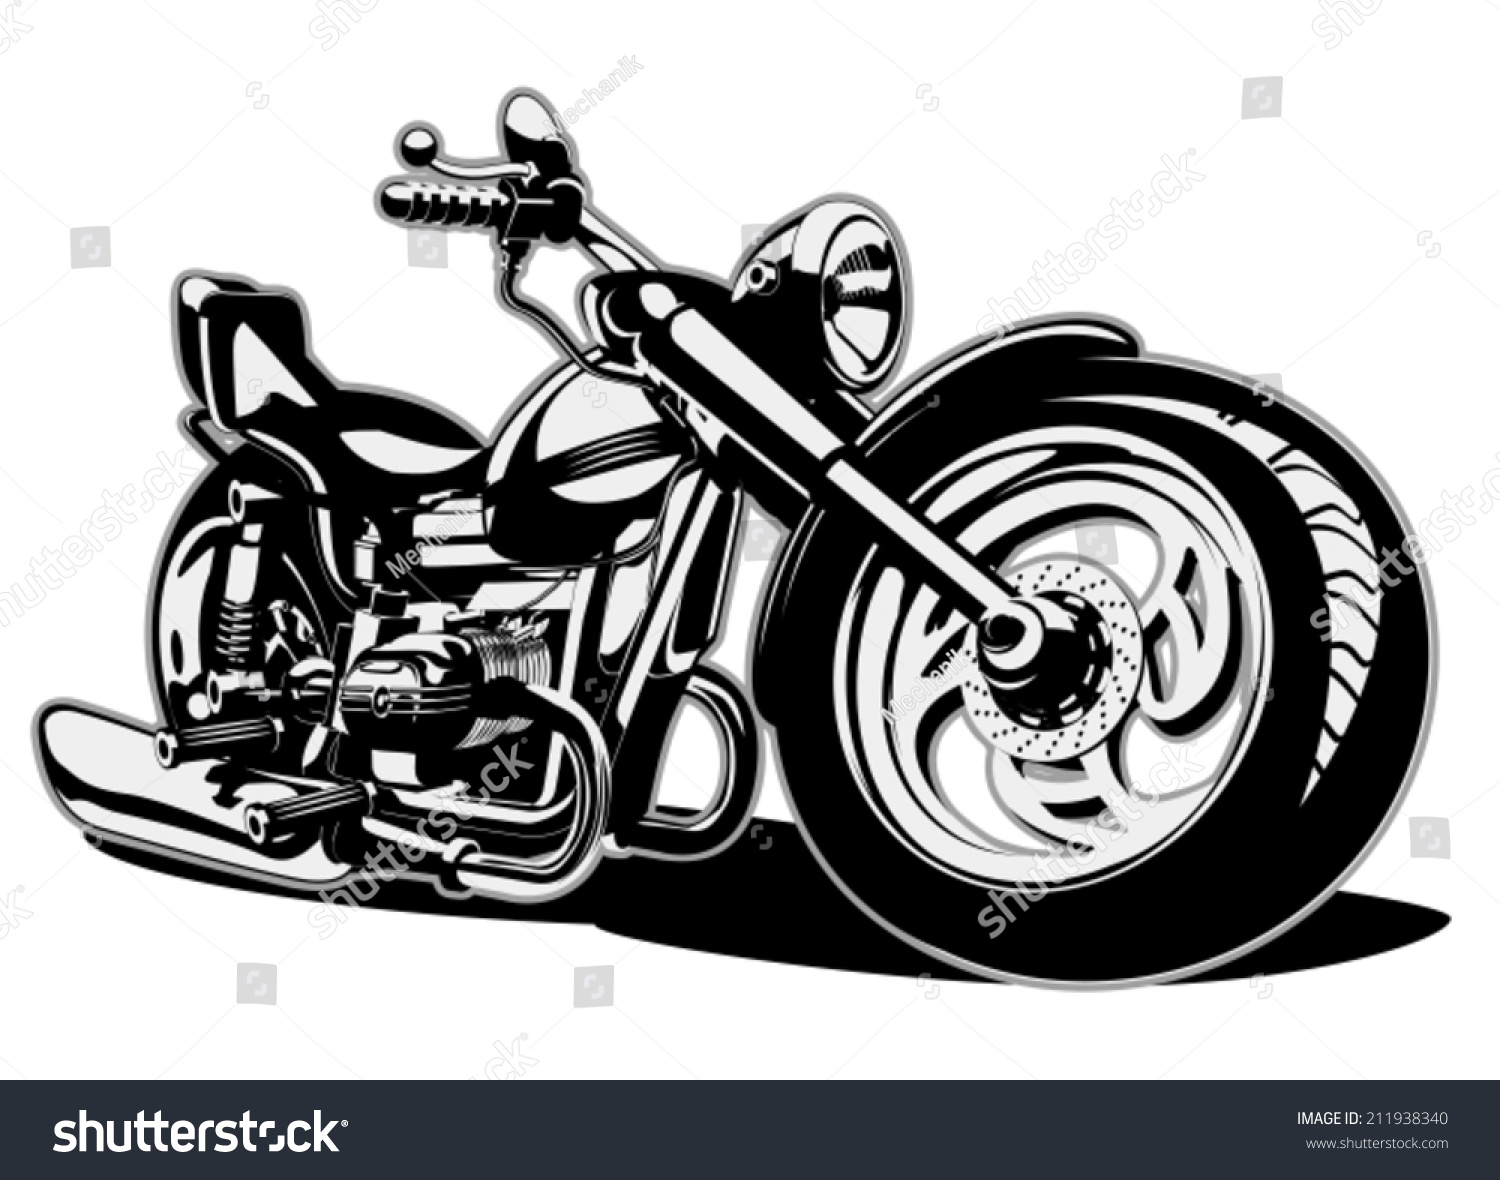 Vector Cartoon Motobike. Eps-8 Separated By Layers For Easy Edit